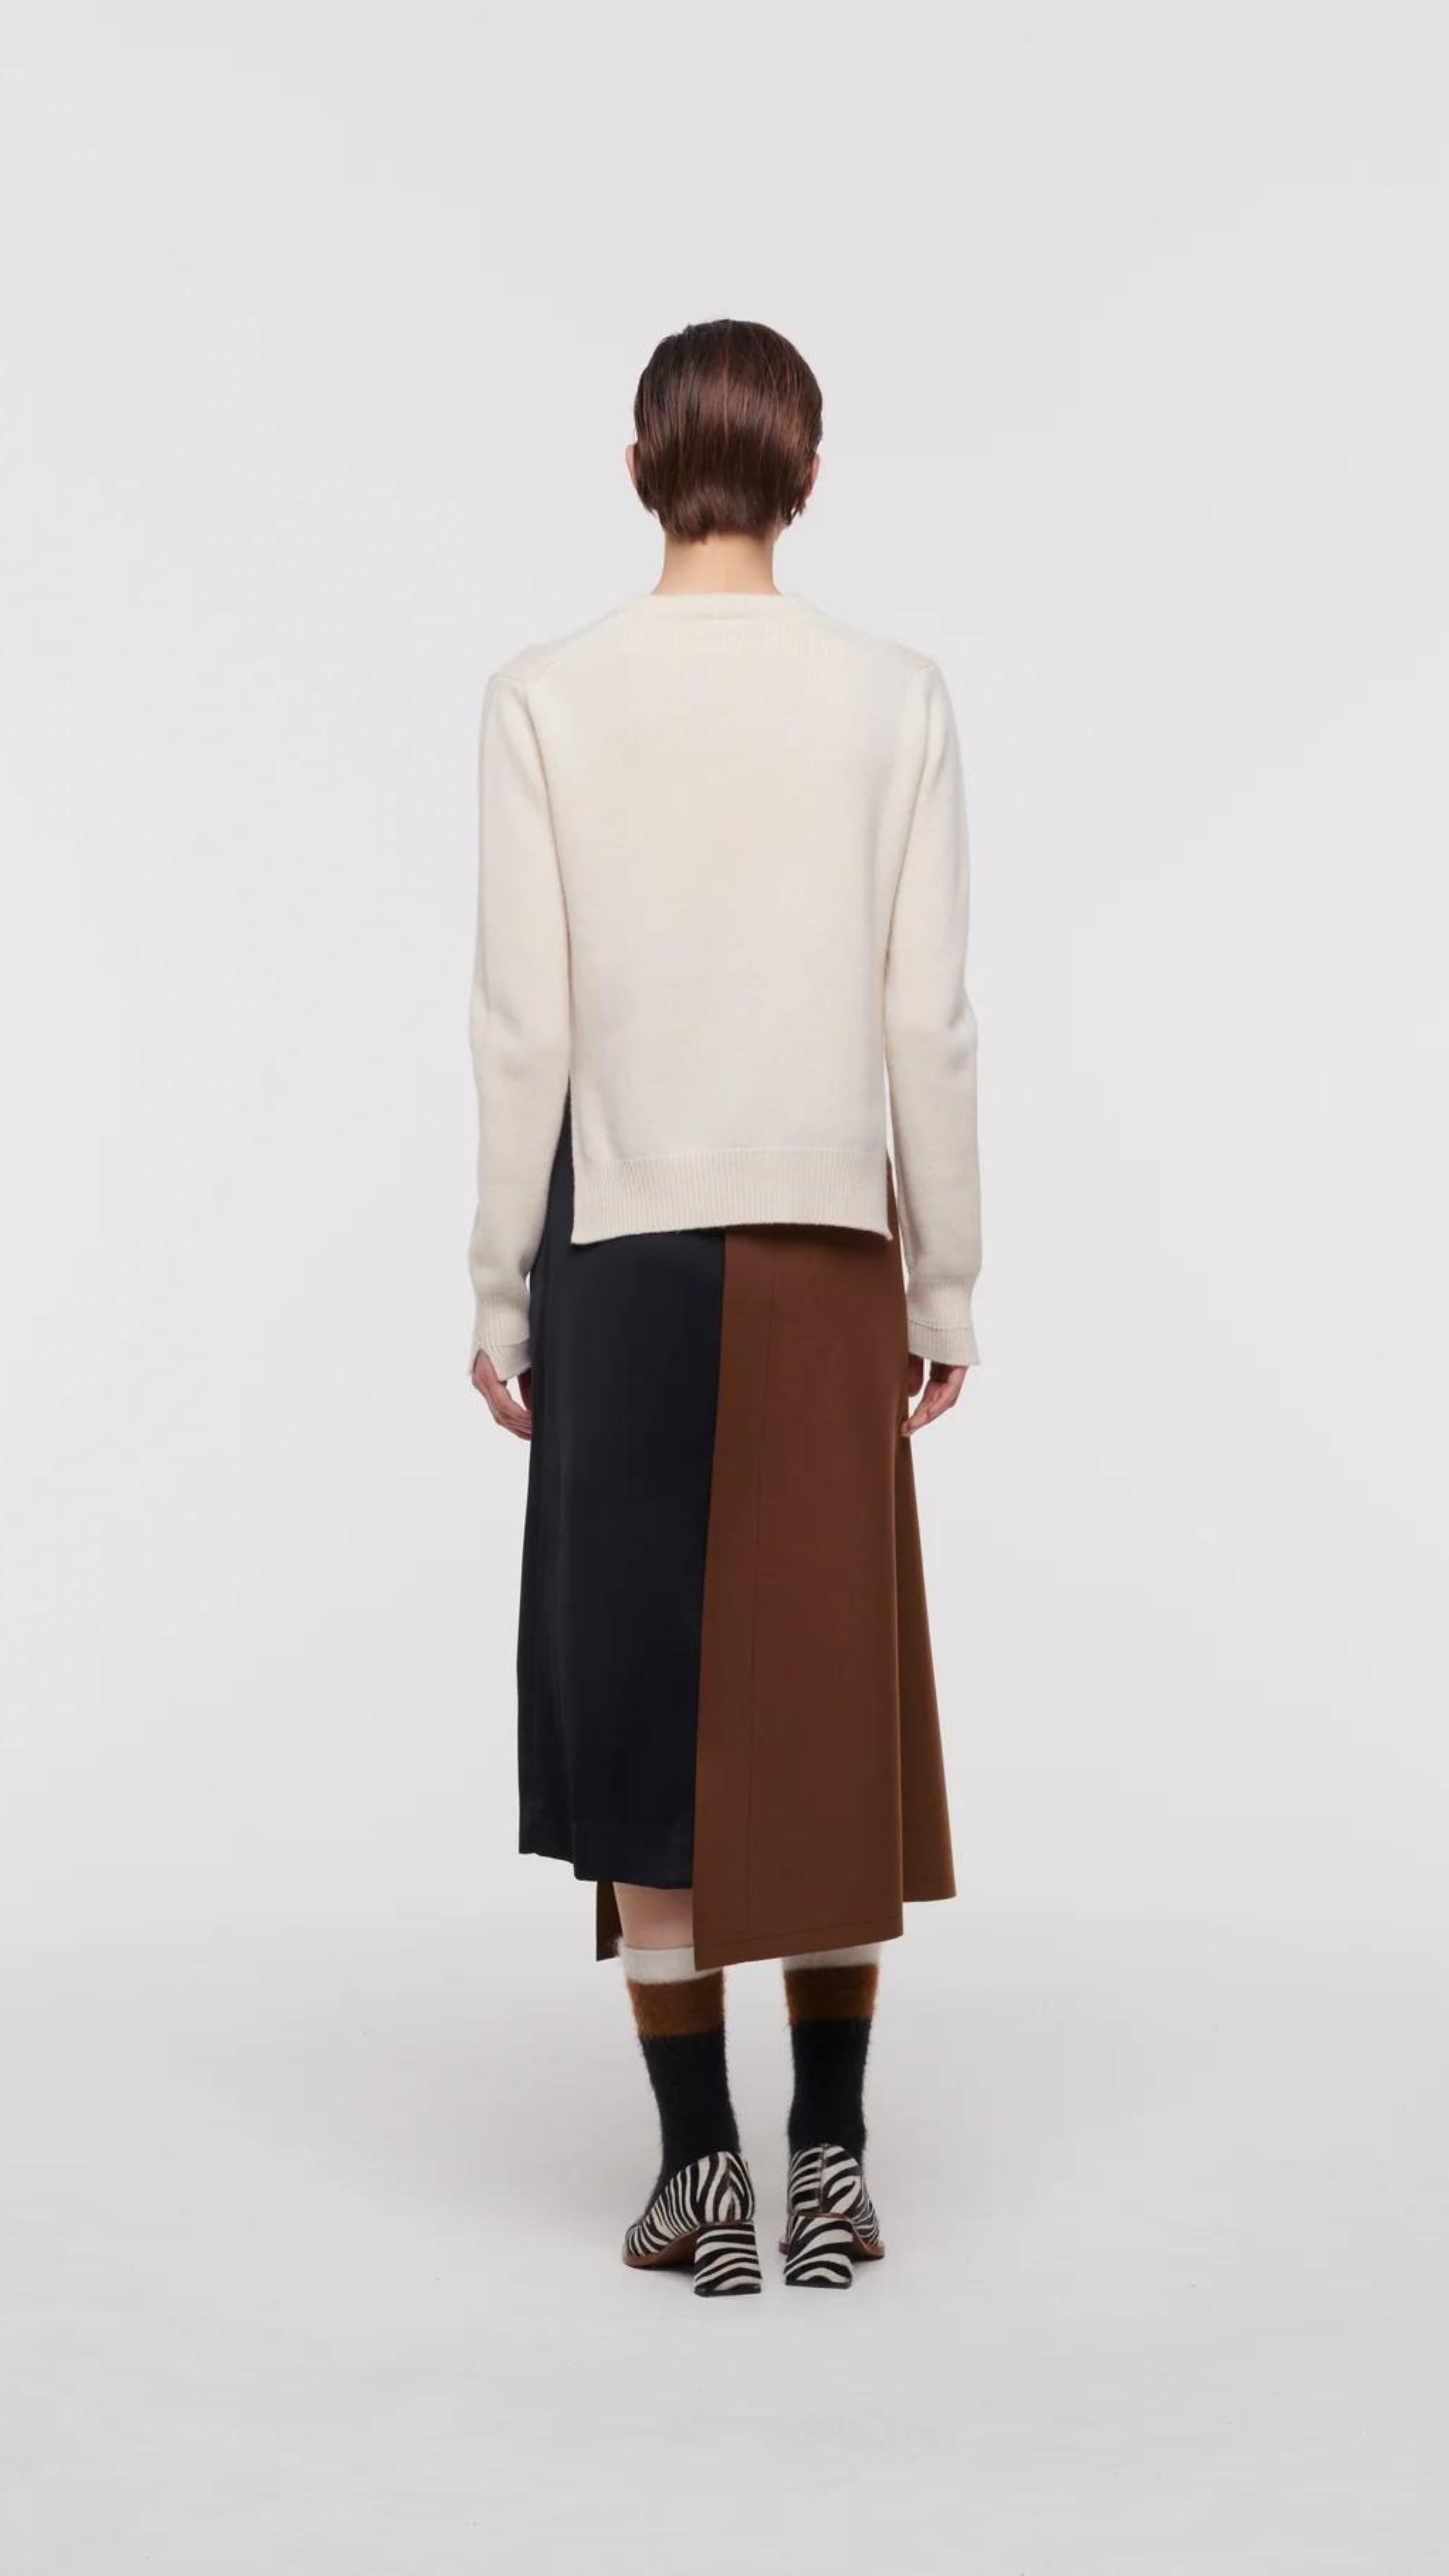 Plac C Contrast Midi Skirt. Paneled midi skirt in sofy brown chestnut wool and black satin. Modern and classic in shape and colors. Shown here on the model facing the back.